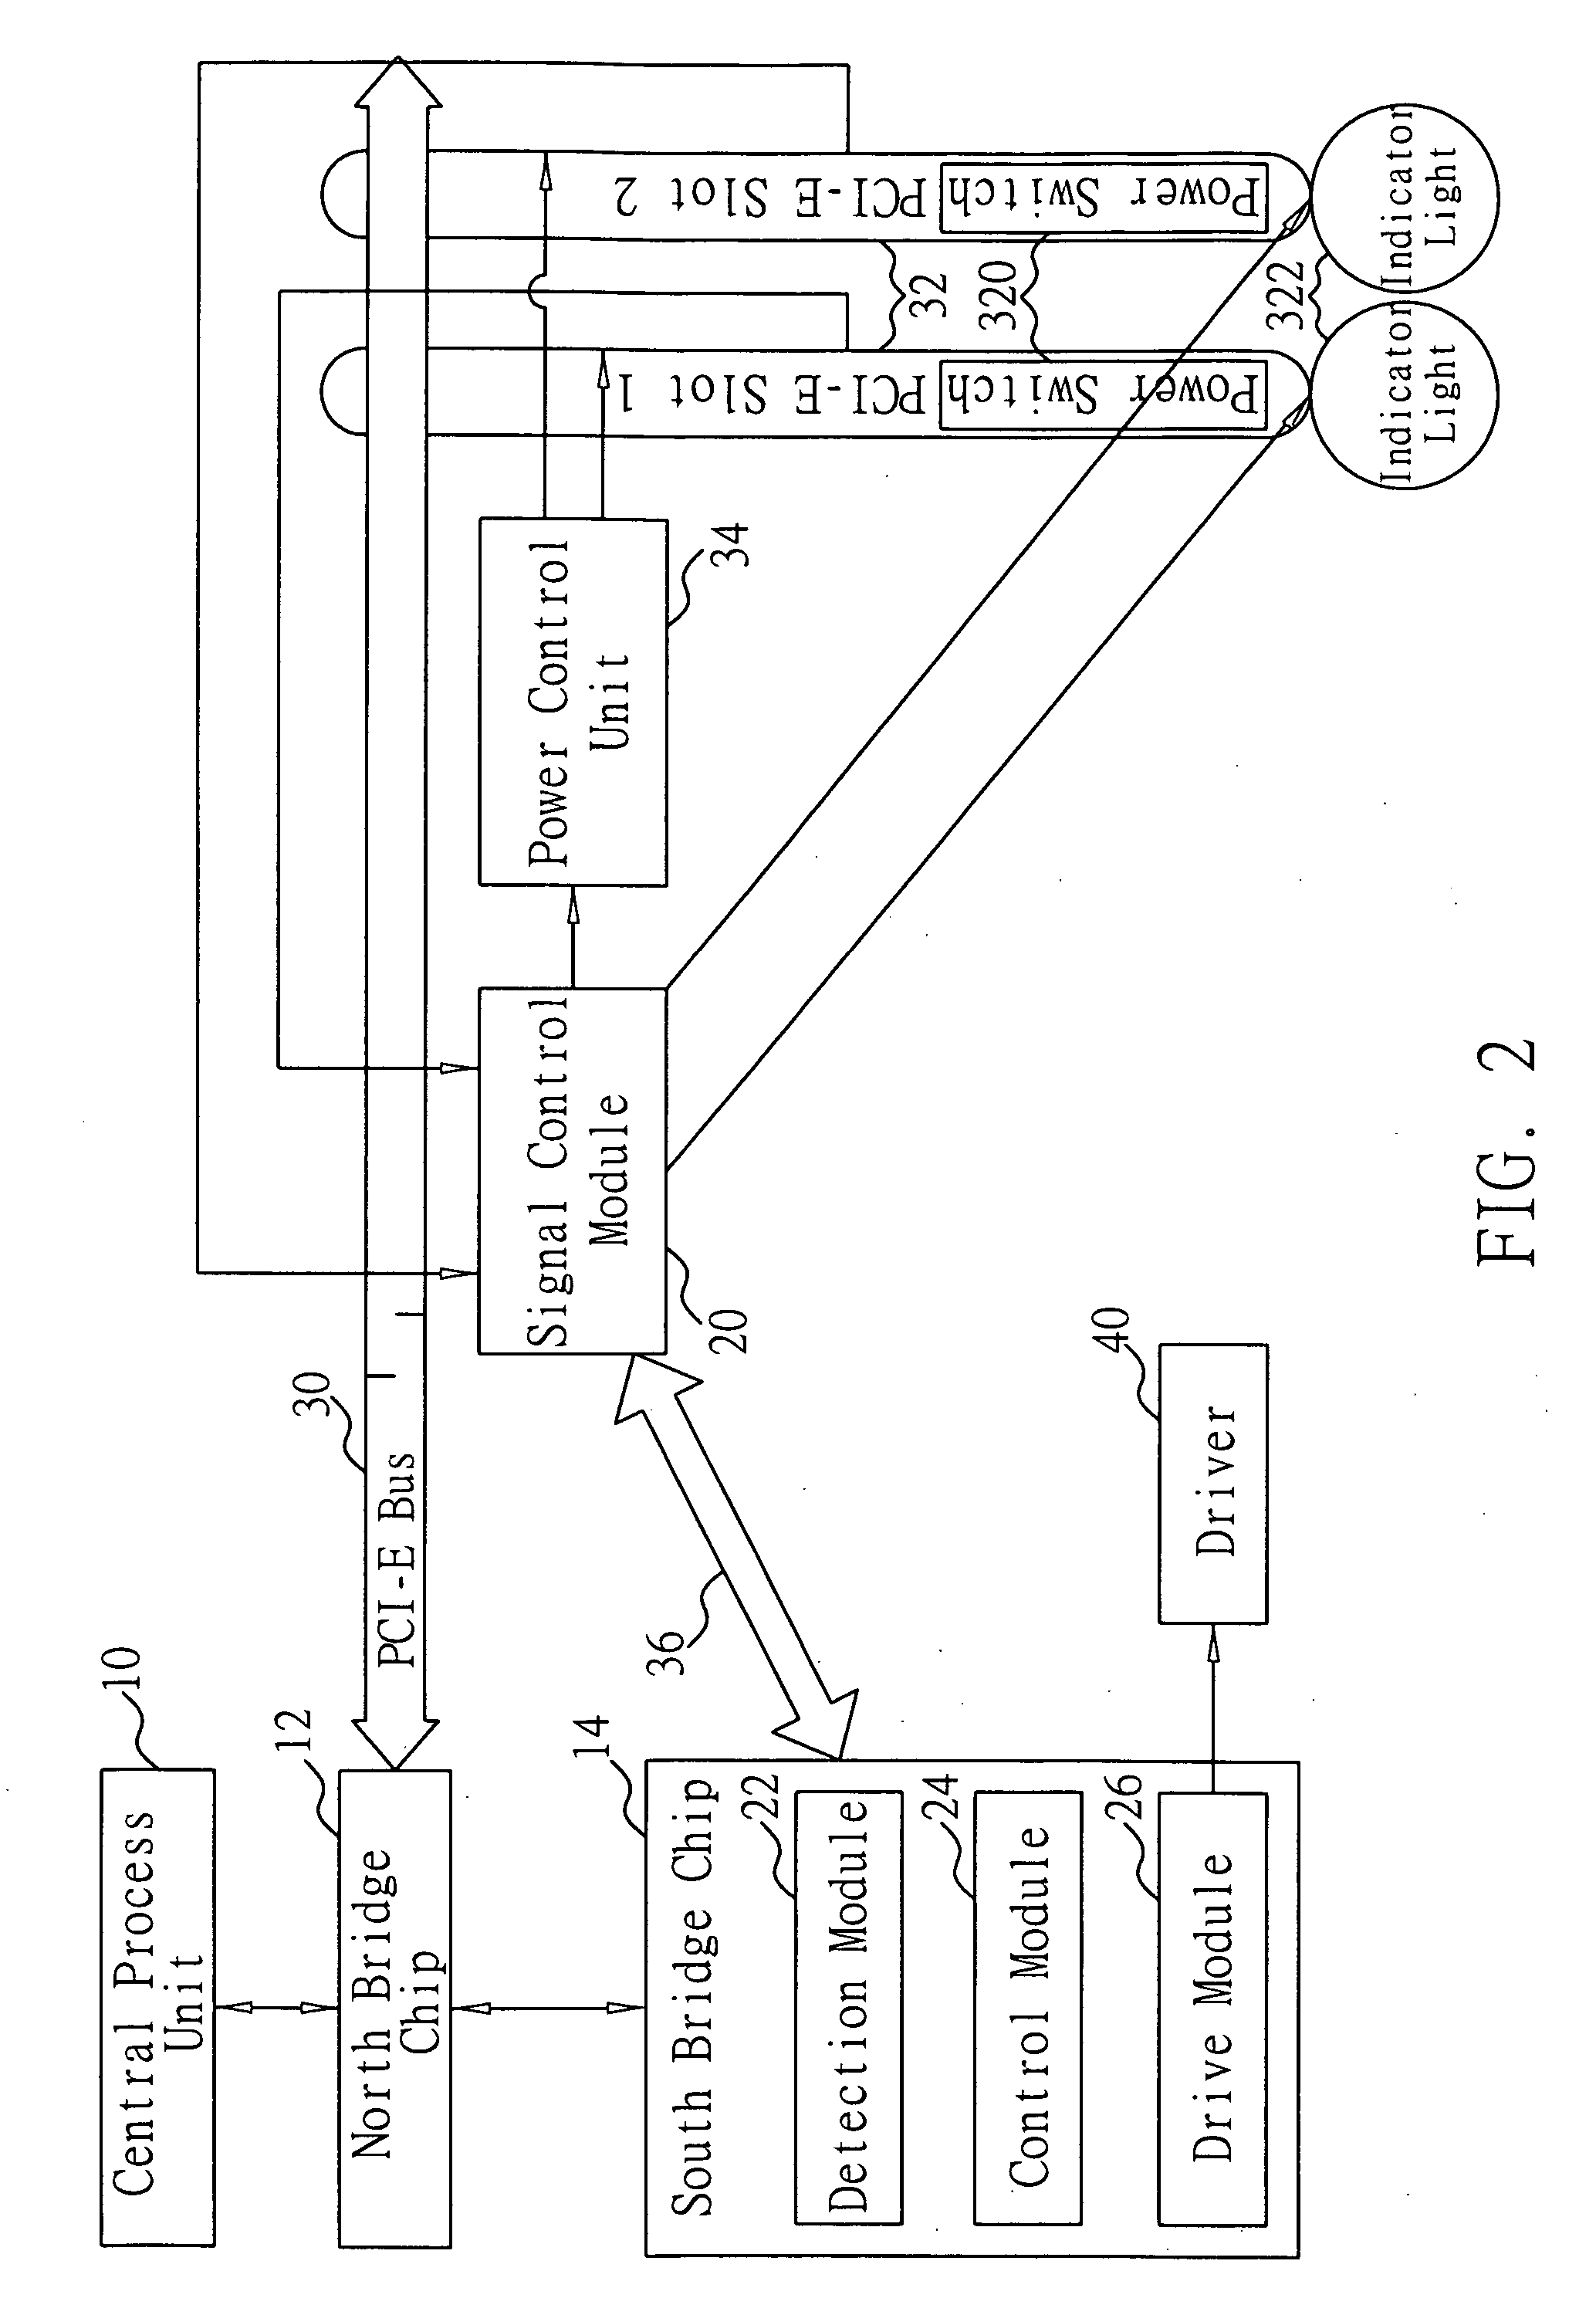 Hot-plug control system and method